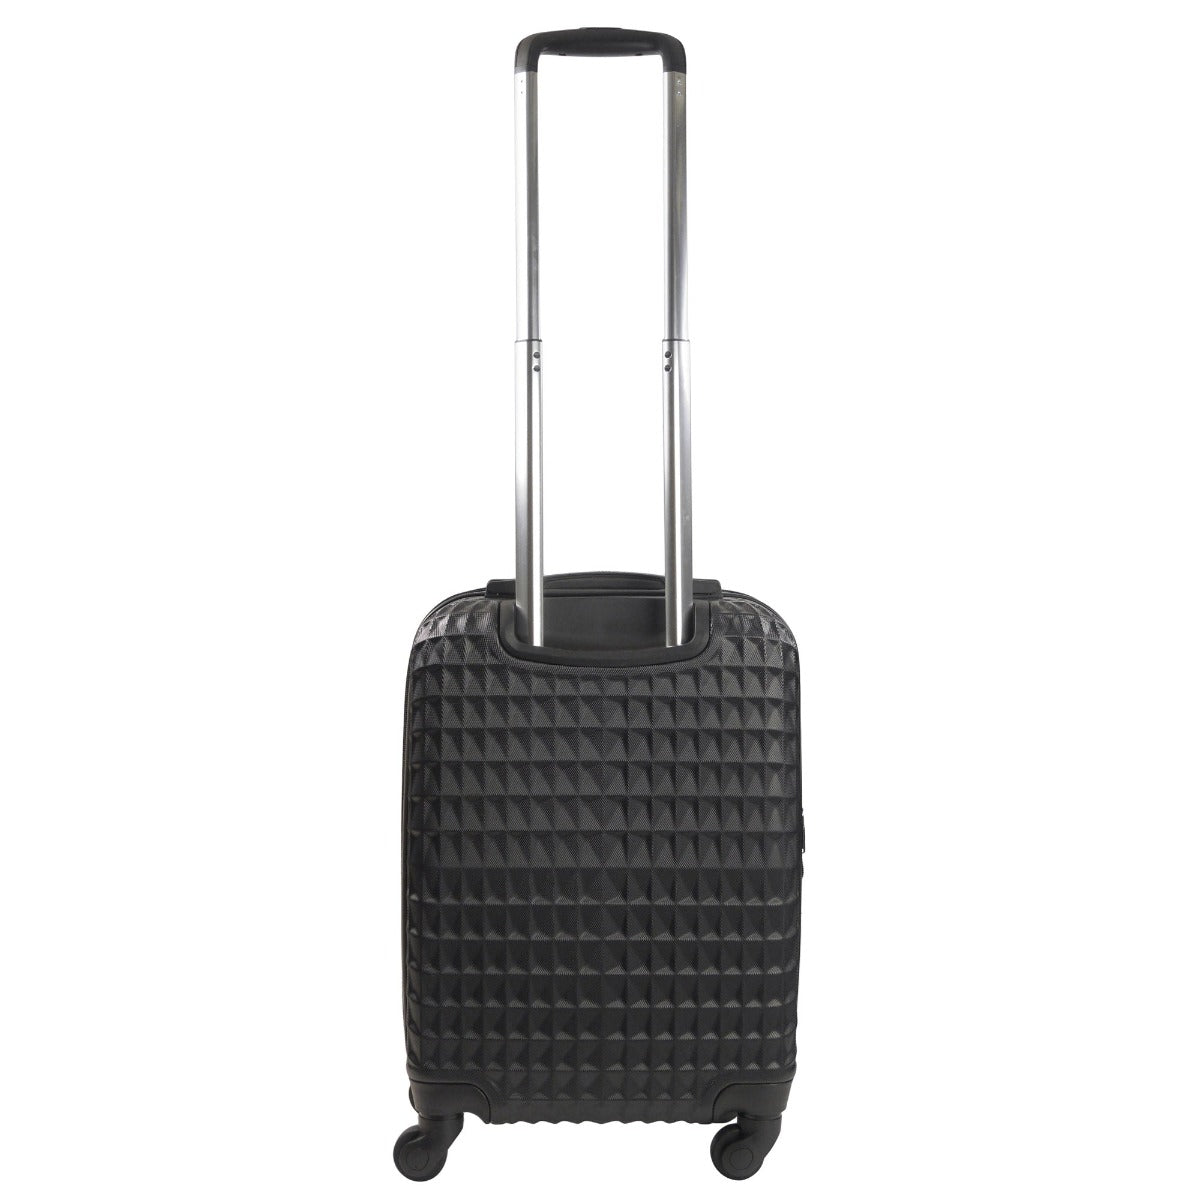 Ful Geo 22 inch carry on expandable hard sided spinner suitcase luggage black